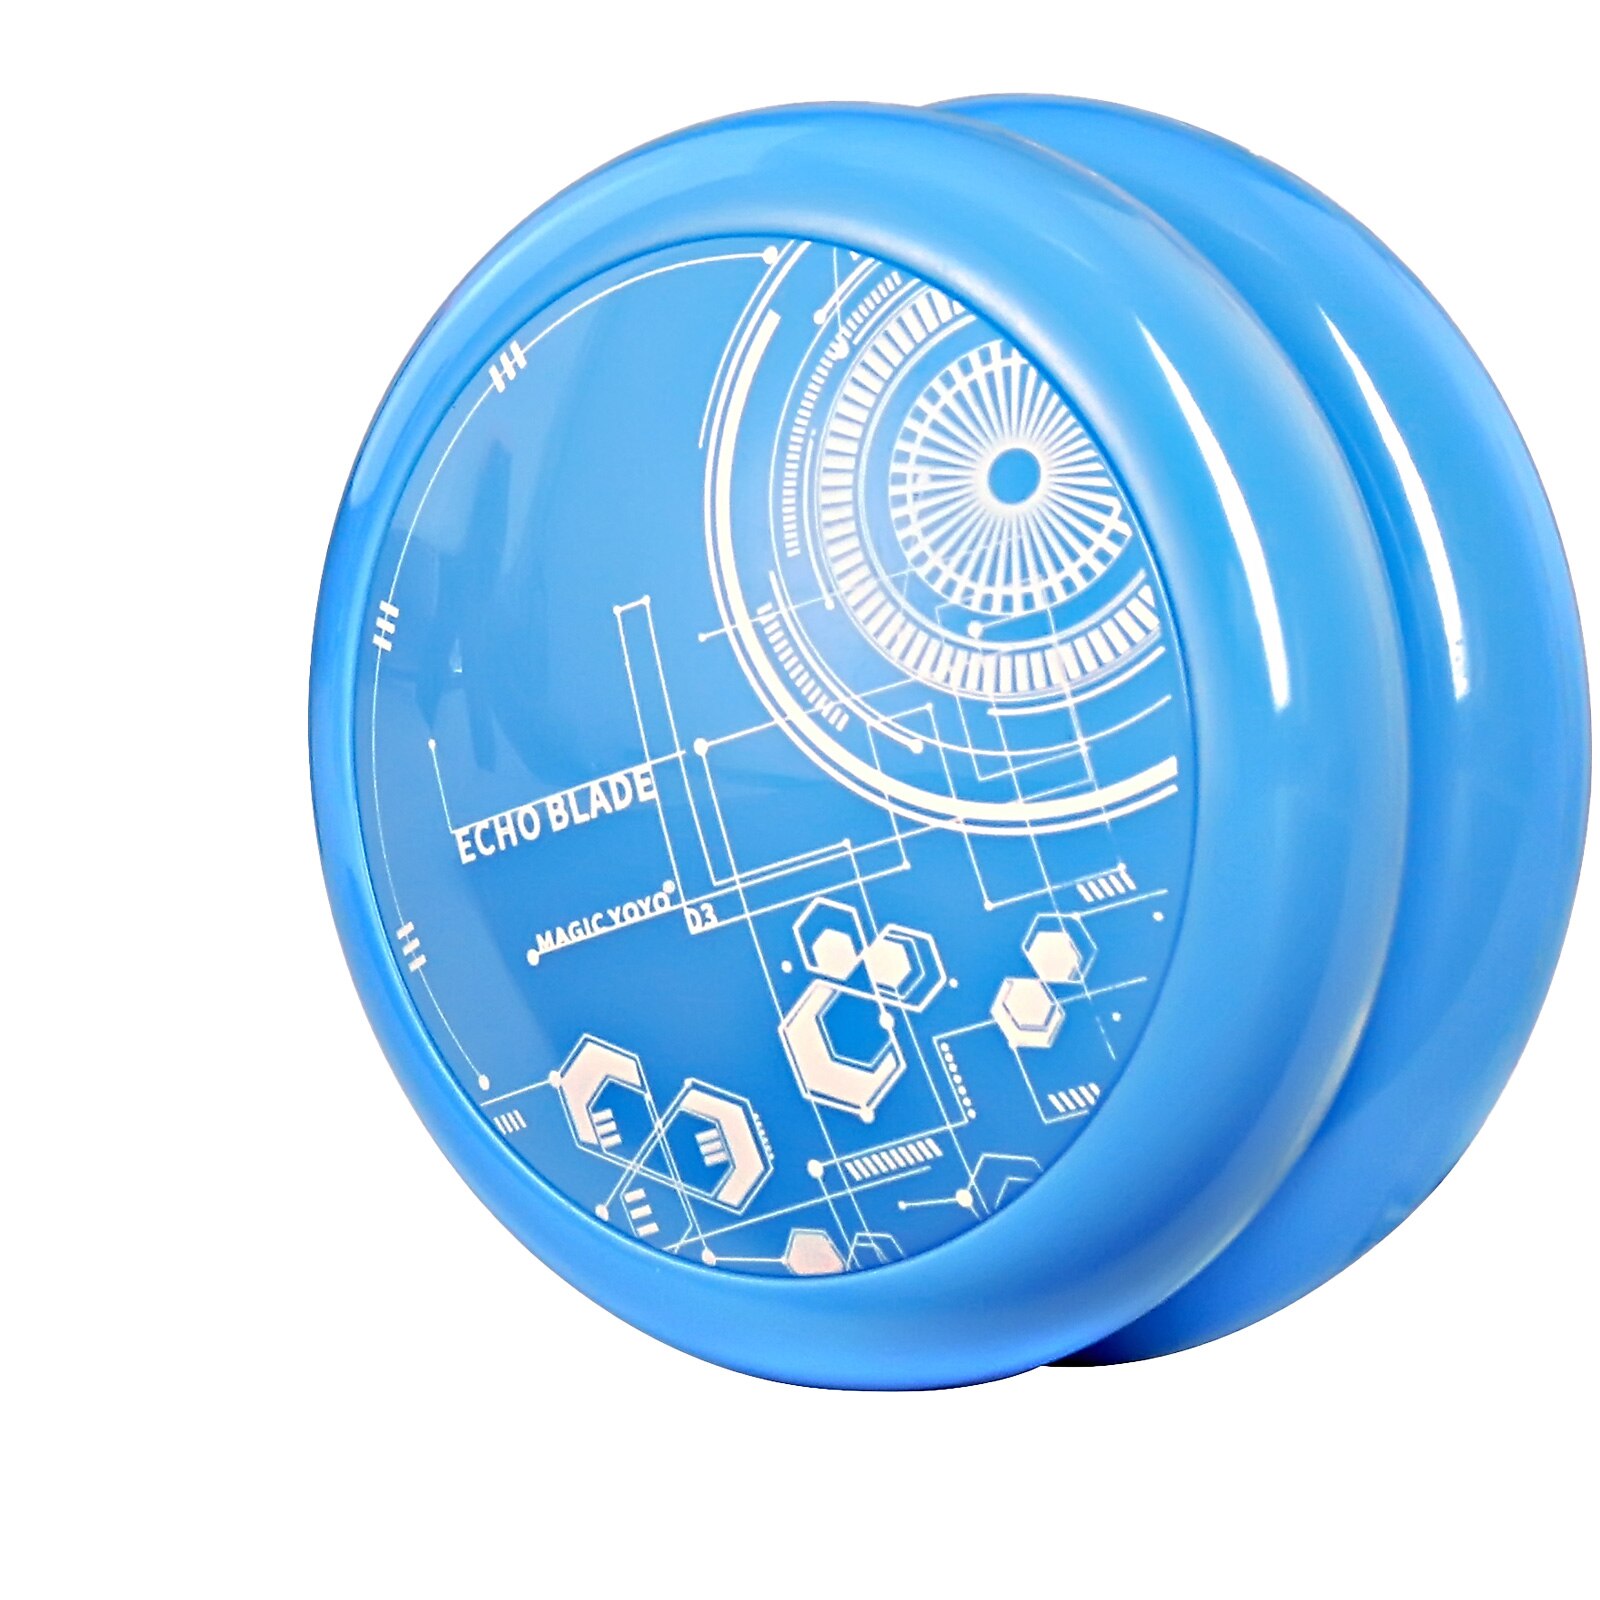 Responsive Yoyos for Kids Classic Baby Toys Beginner Yoyo with Narrow Bearing Steel Axle ABS Body Looping Play Spinning Faster: Blue